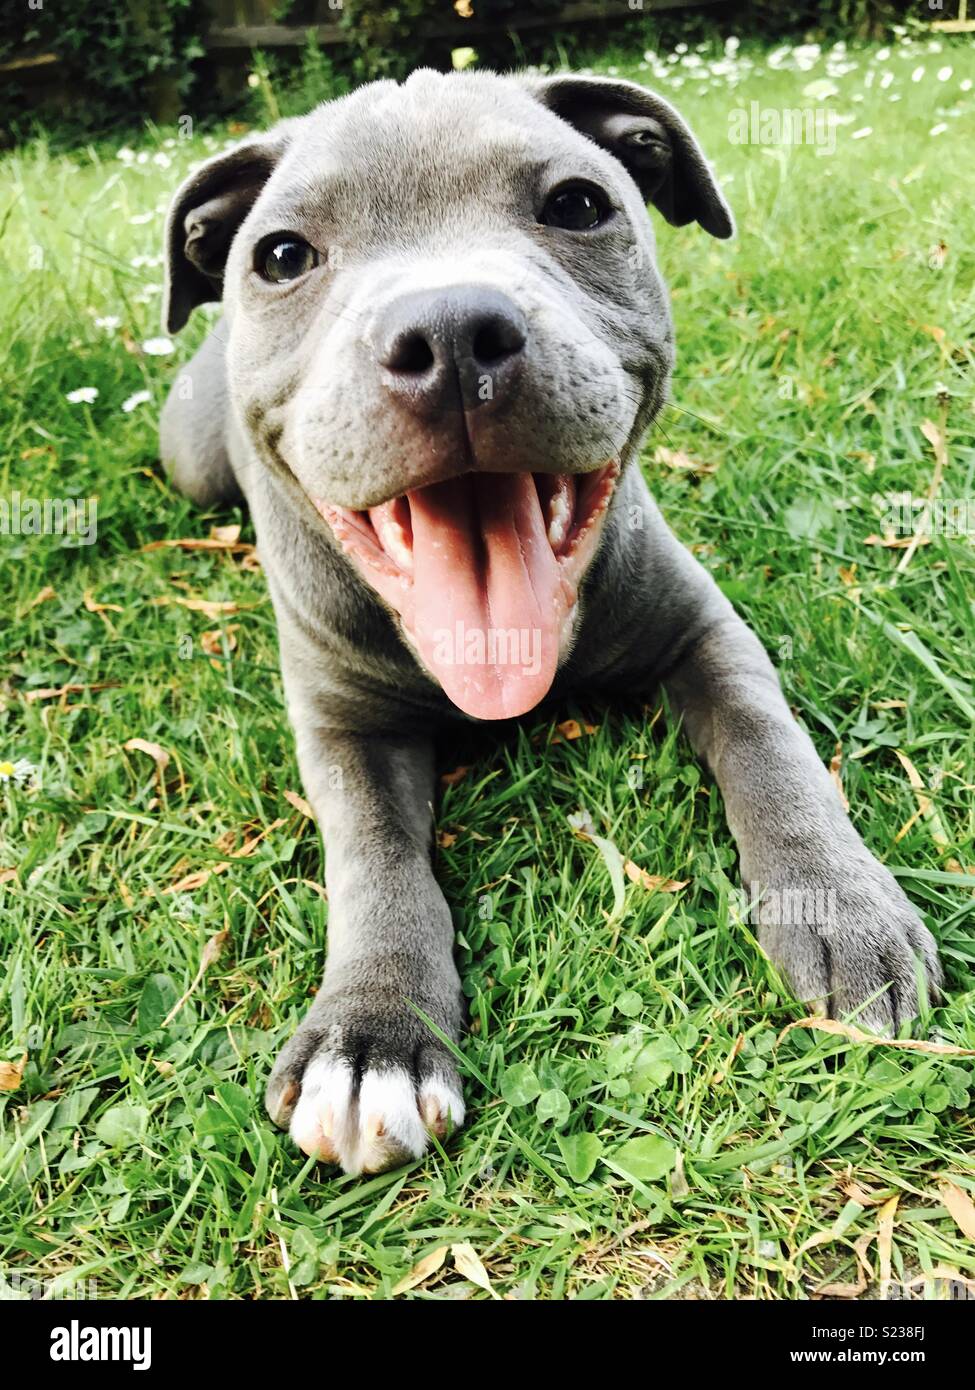 Blue Staffy High Resolution Stock Photography and Images - Alamy